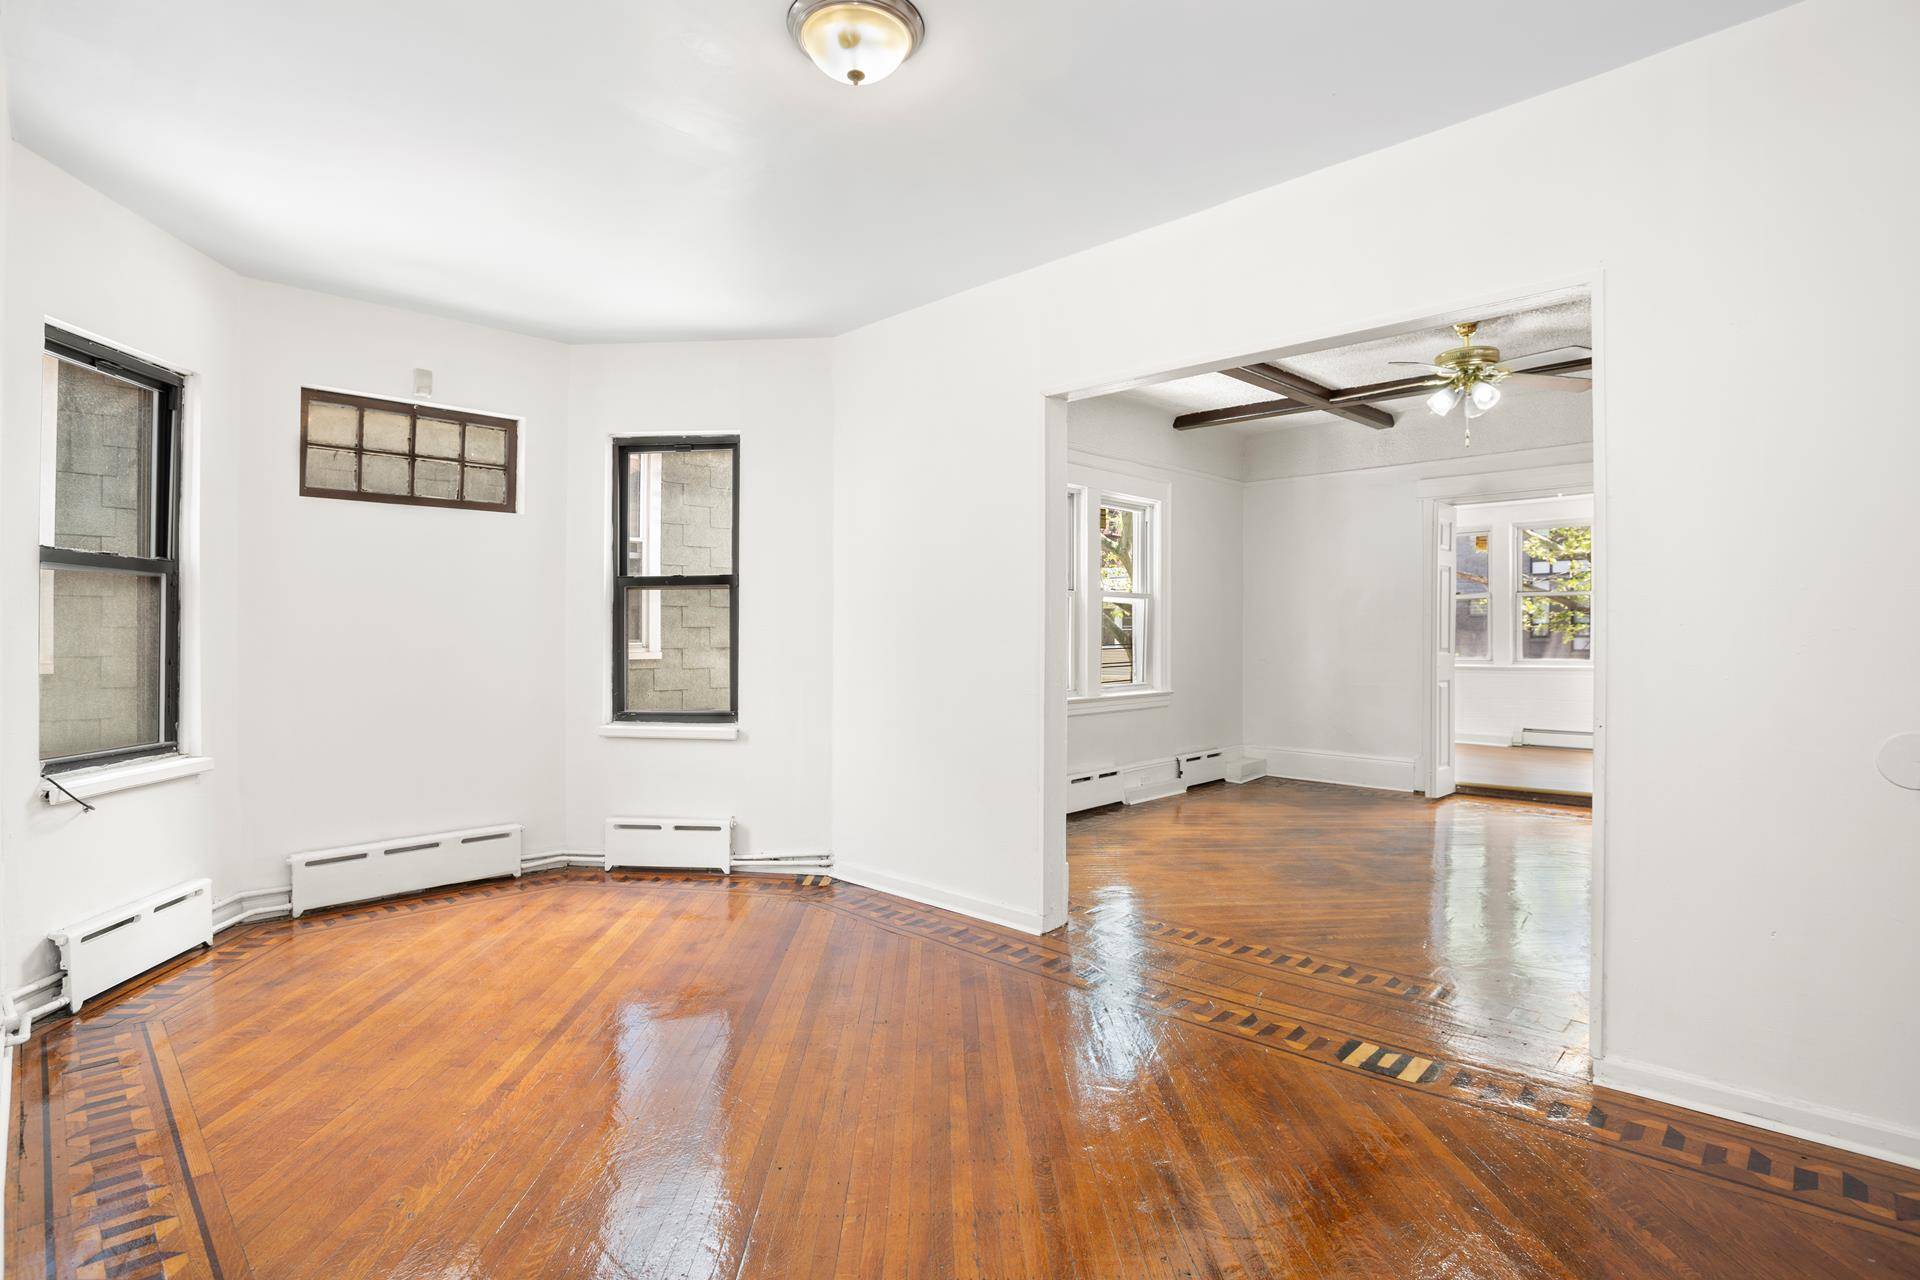 Lovely 3 Bedroom 1 Bath spacious apartment for rent in Windsor Terrace.